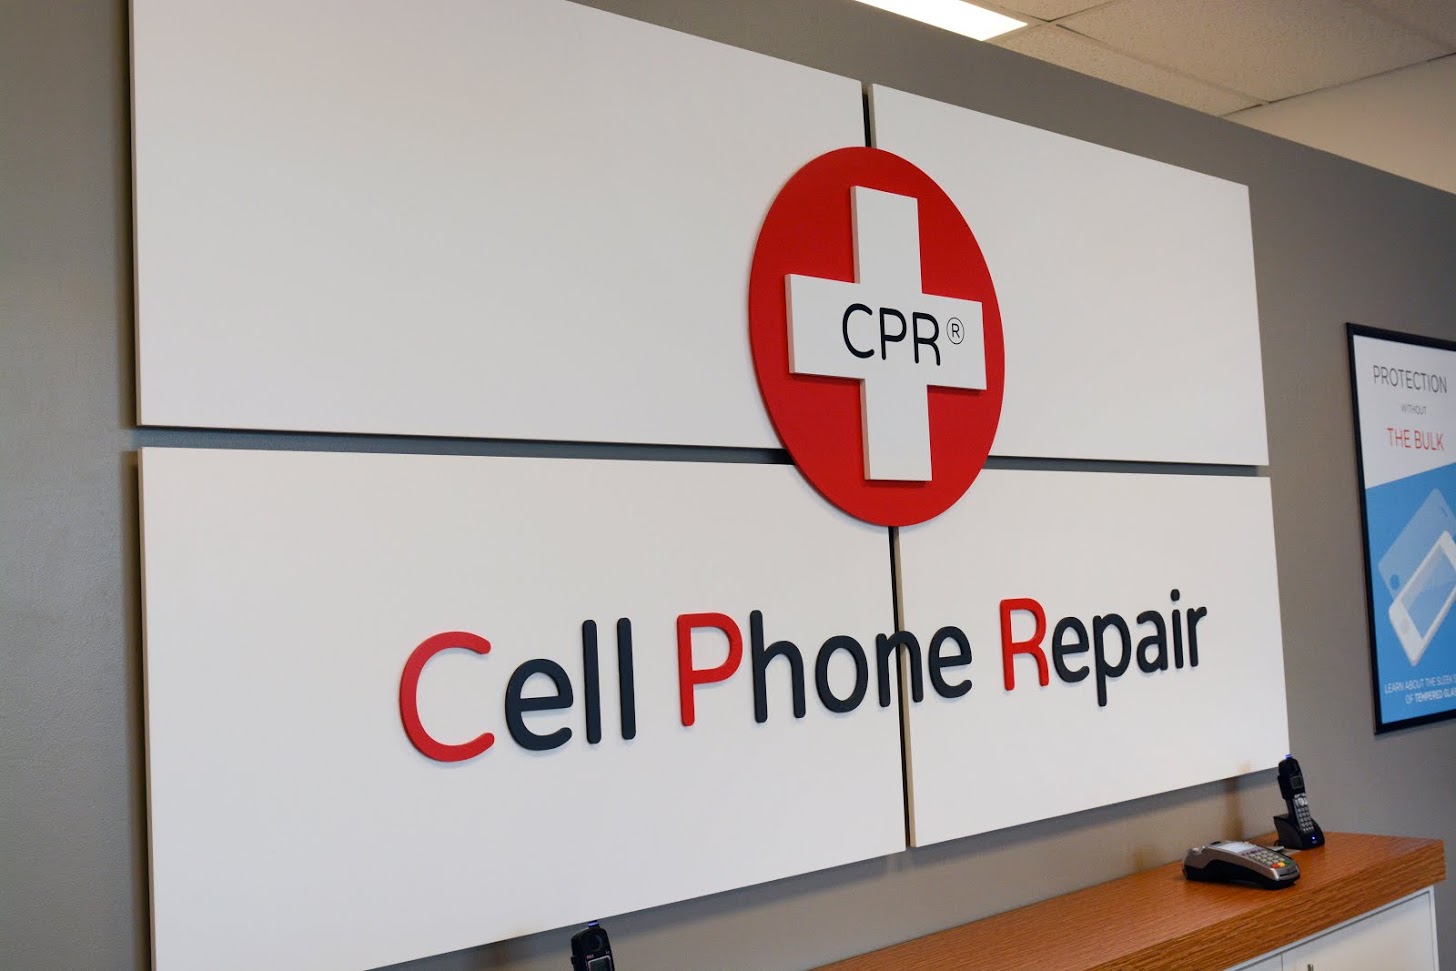 CPR Cell Phone Repair, Thursday, May 16, 2019, Press release picture